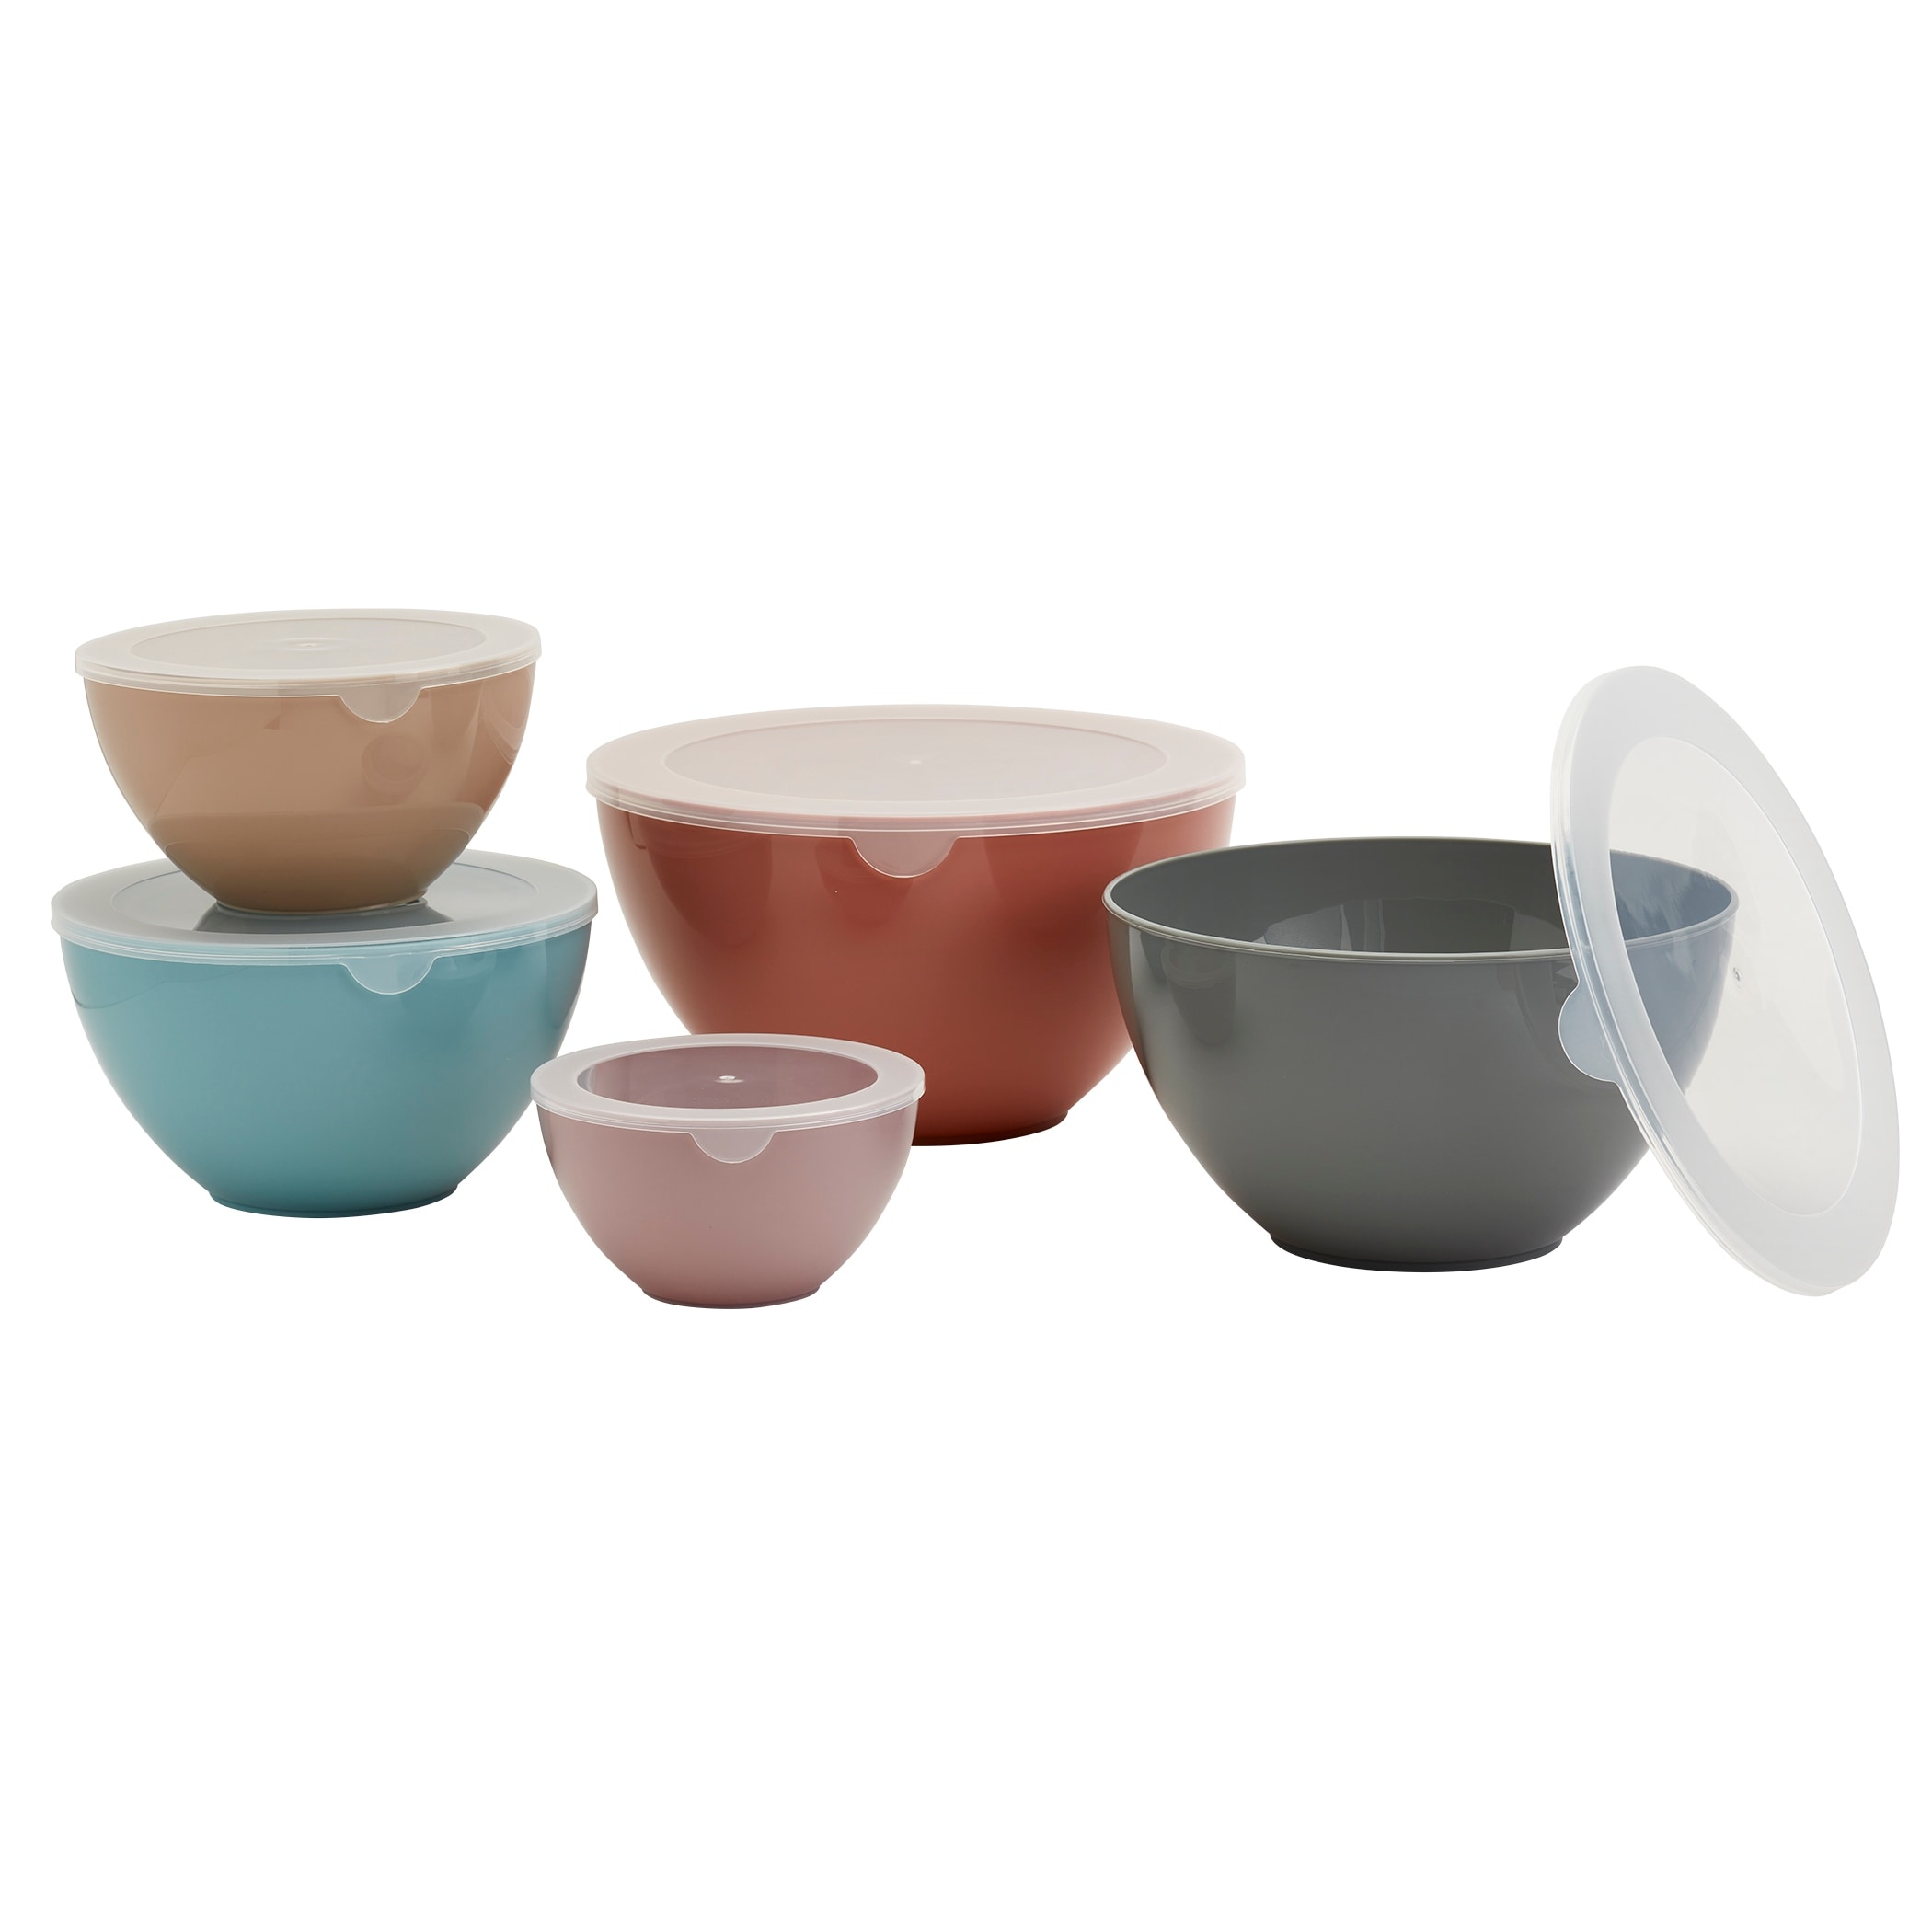 https://ak1.ostkcdn.com/images/products/is/images/direct/a69a4c3acd733aadf10724cb0fc2c2bc26db3a56/10-Piece-Mixing-Bowl-Set-with-Lids%2C-Assorted-Colors.jpg